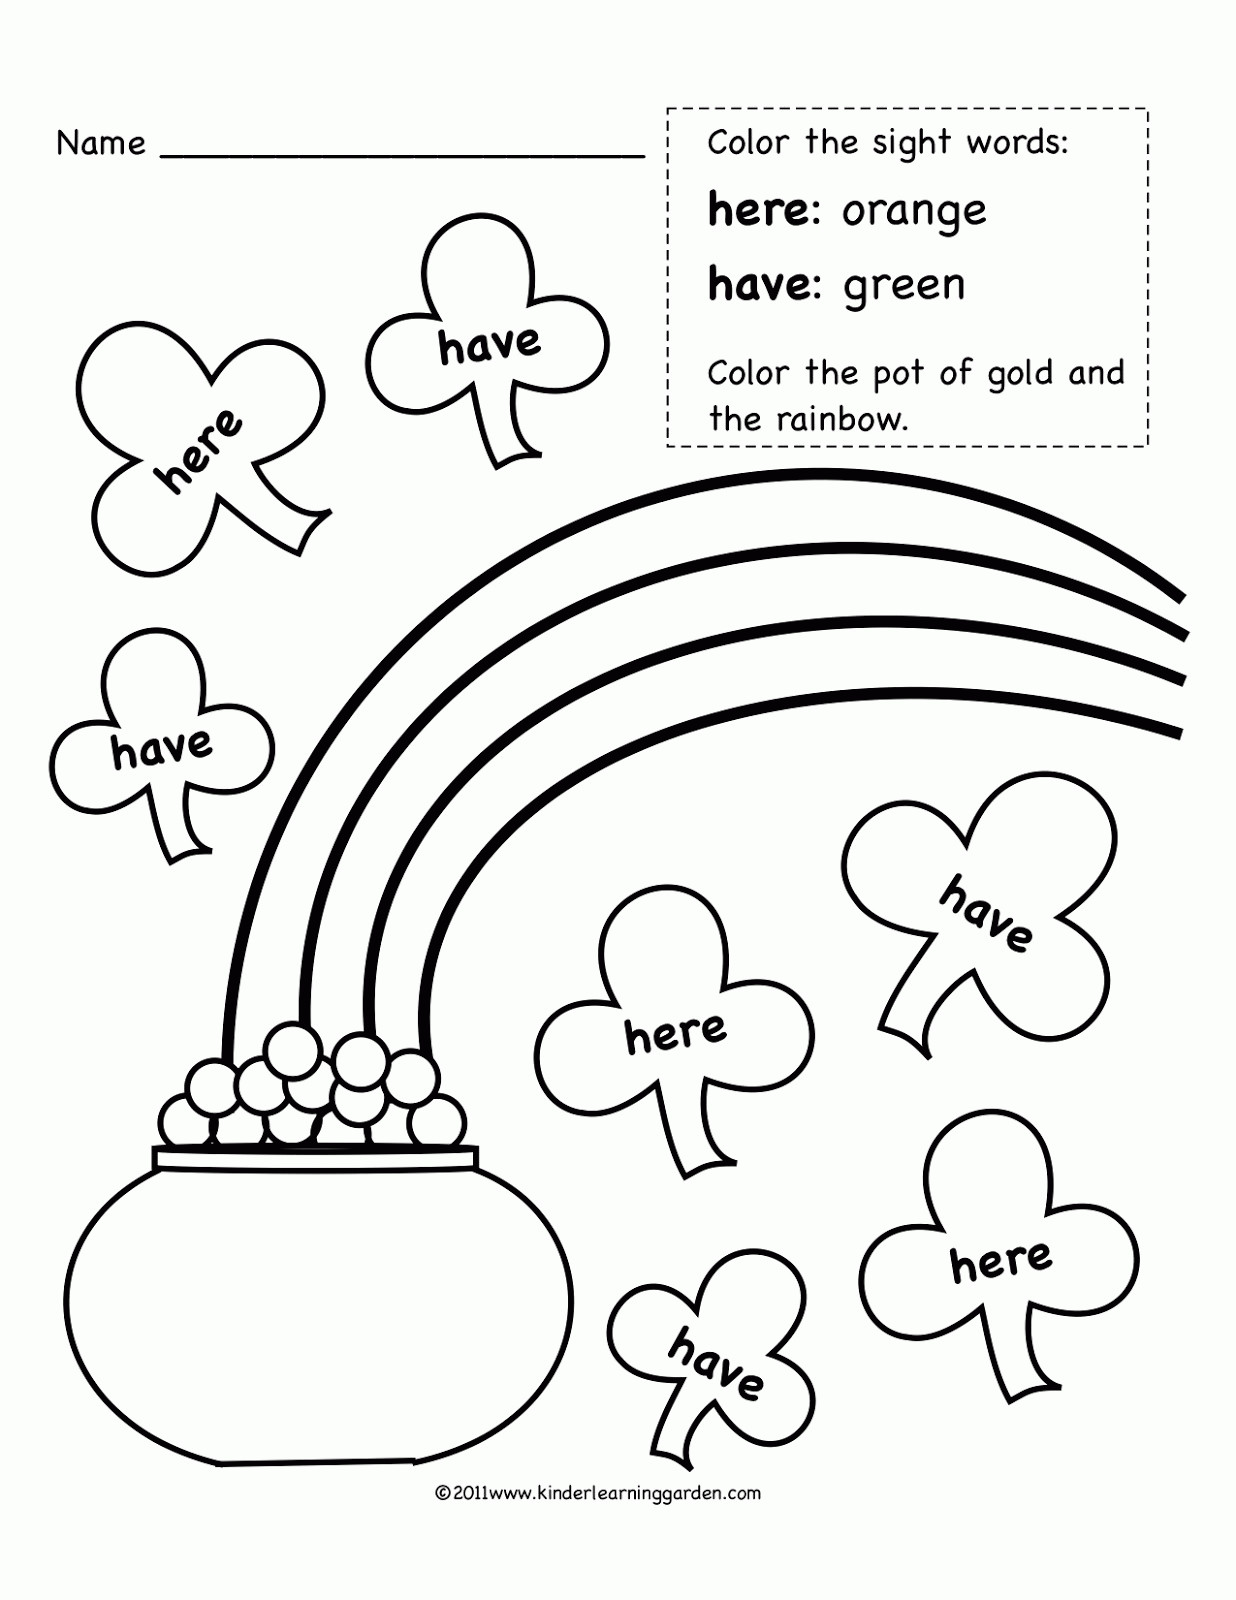 Free Printable Sight Word Coloring Pages
 Sight Words Coloring Pages Coloring Home